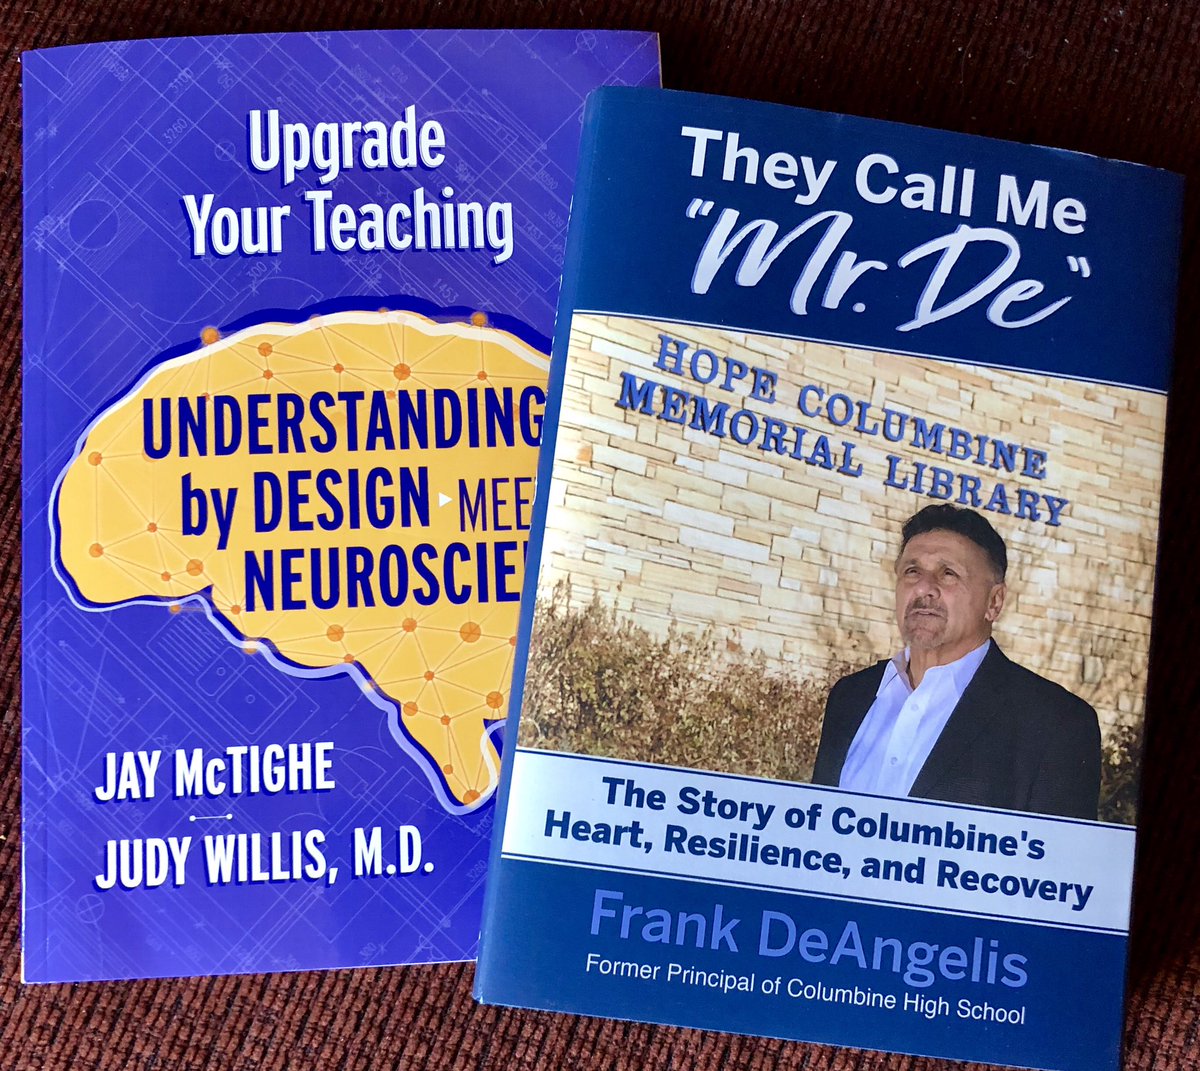 Looks like I’ve some catching up@to do! #theycallmemrde #ubd #buildyourstack @ascd @dbc_inc